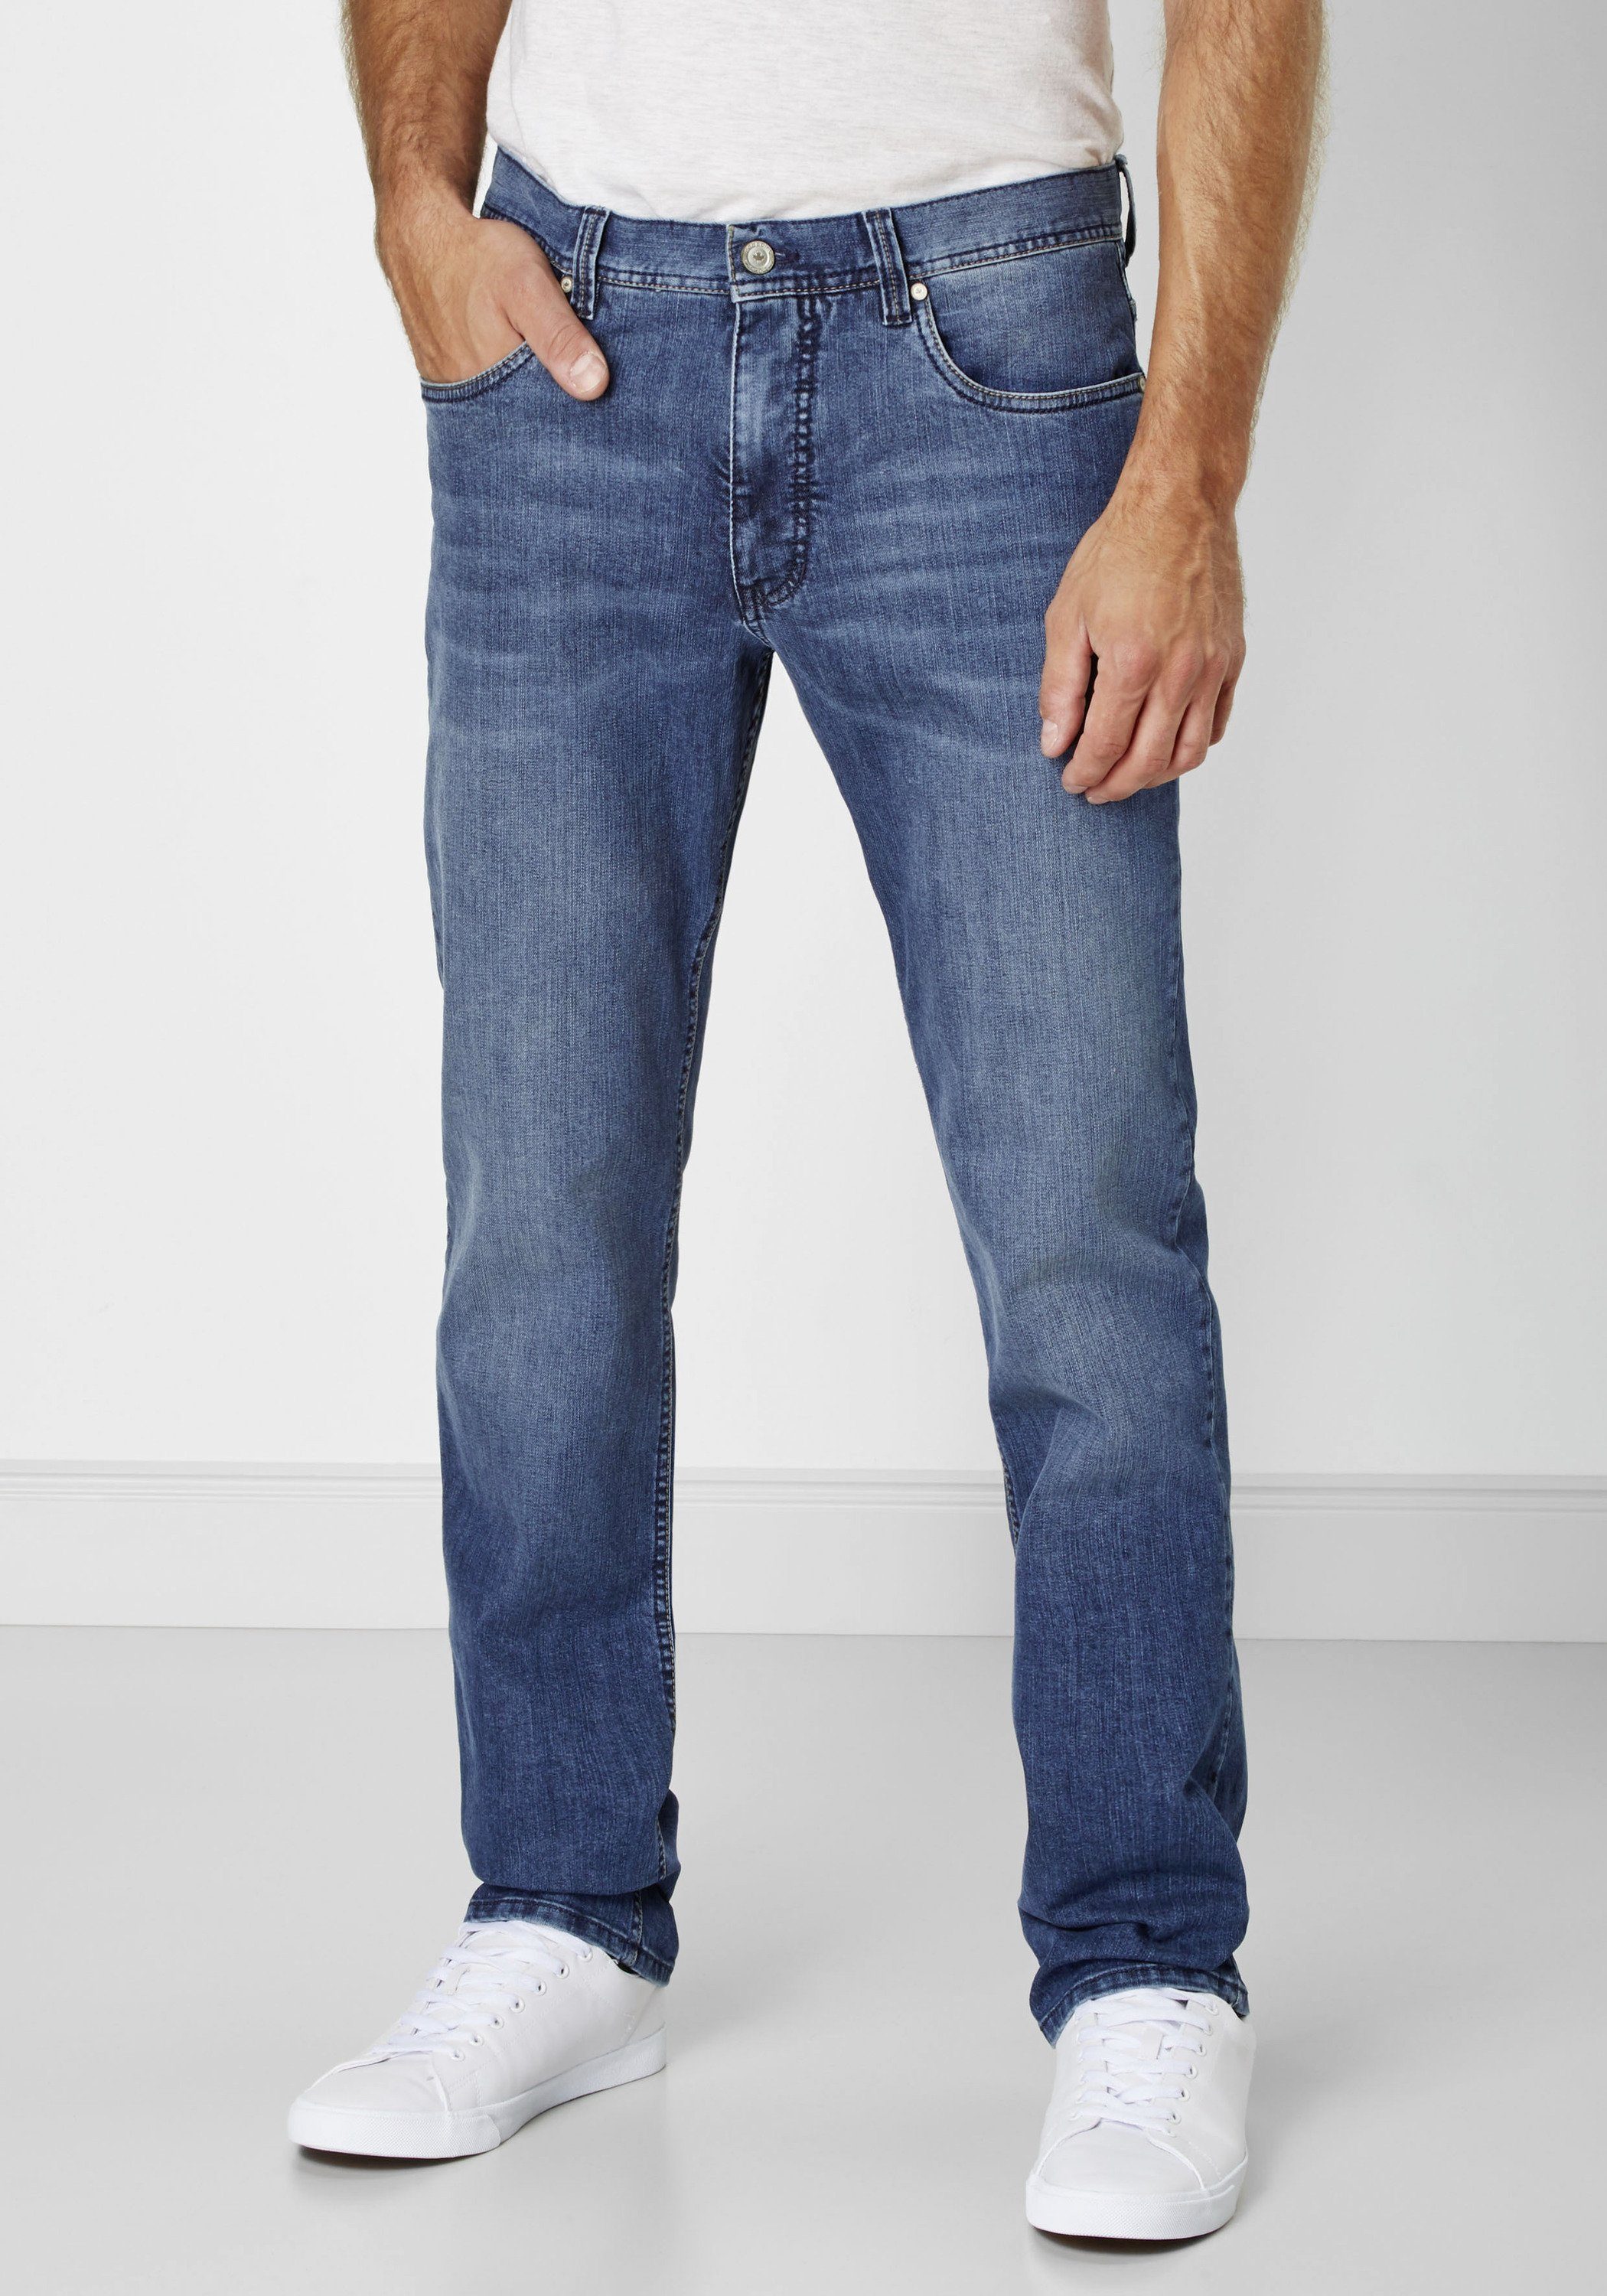 Redpoint Langley 5-pocket jeans. 